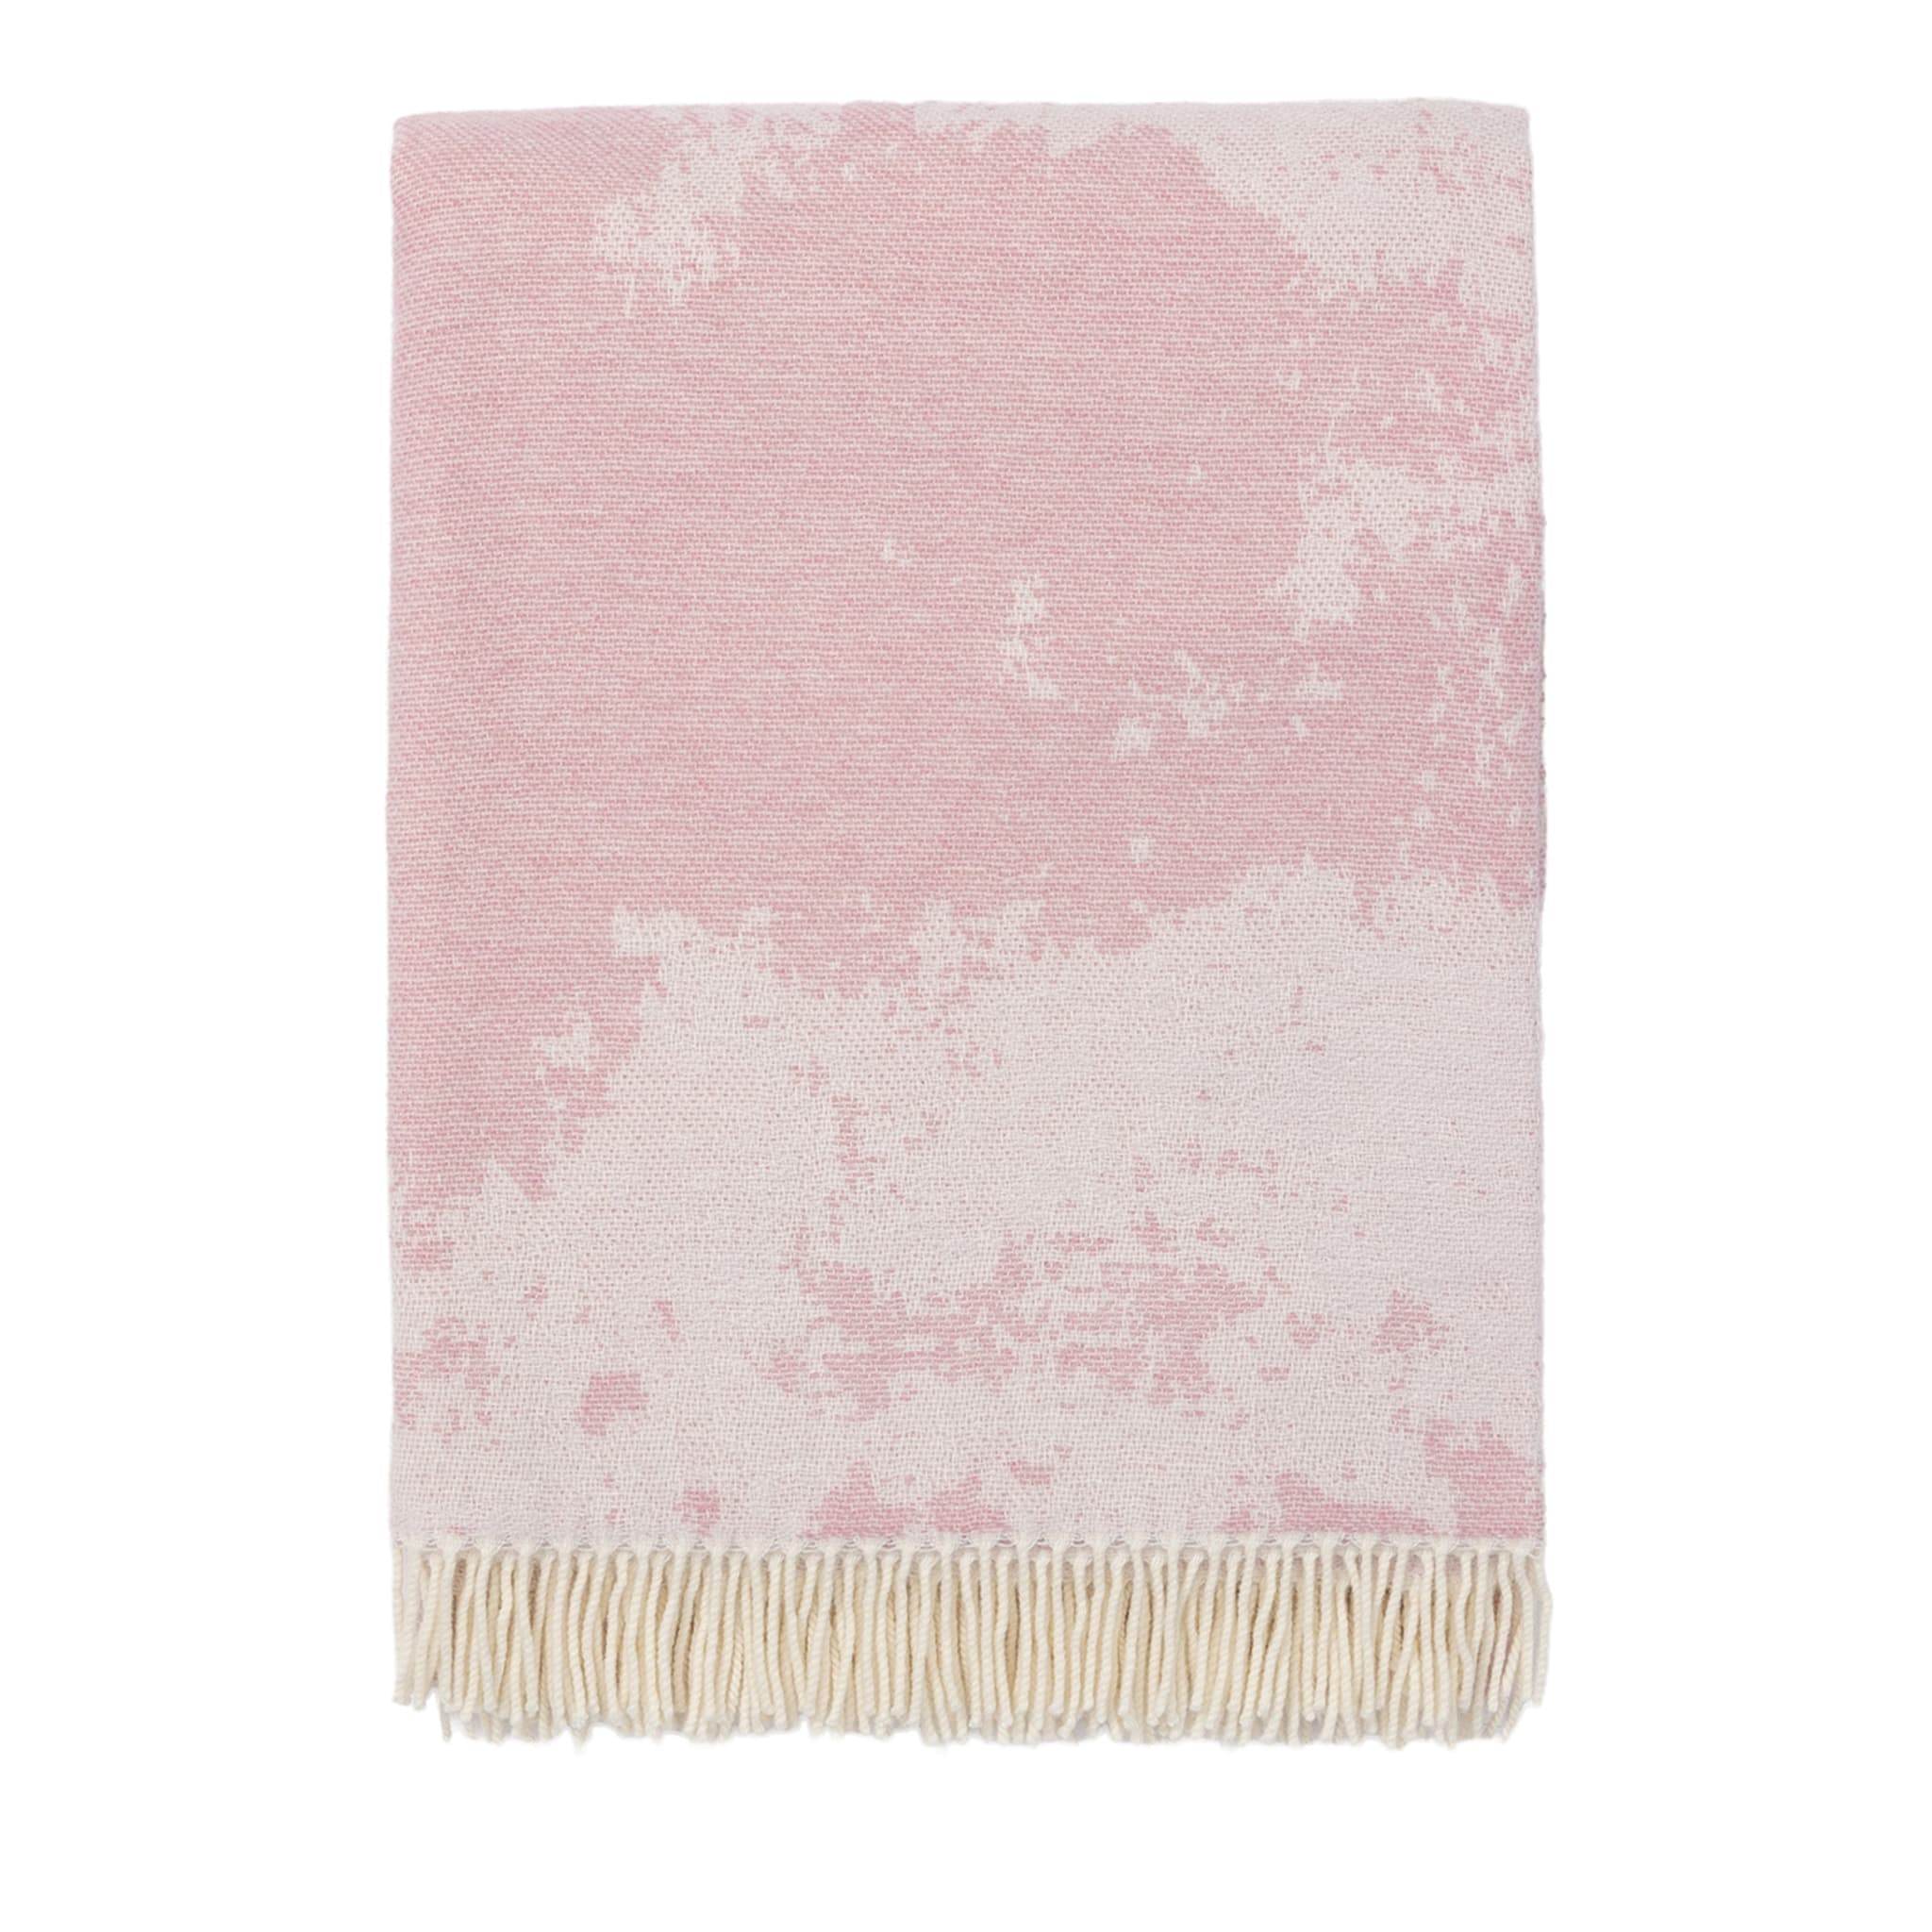 Fringed Plaster-Effect Pink Blanket - Main view